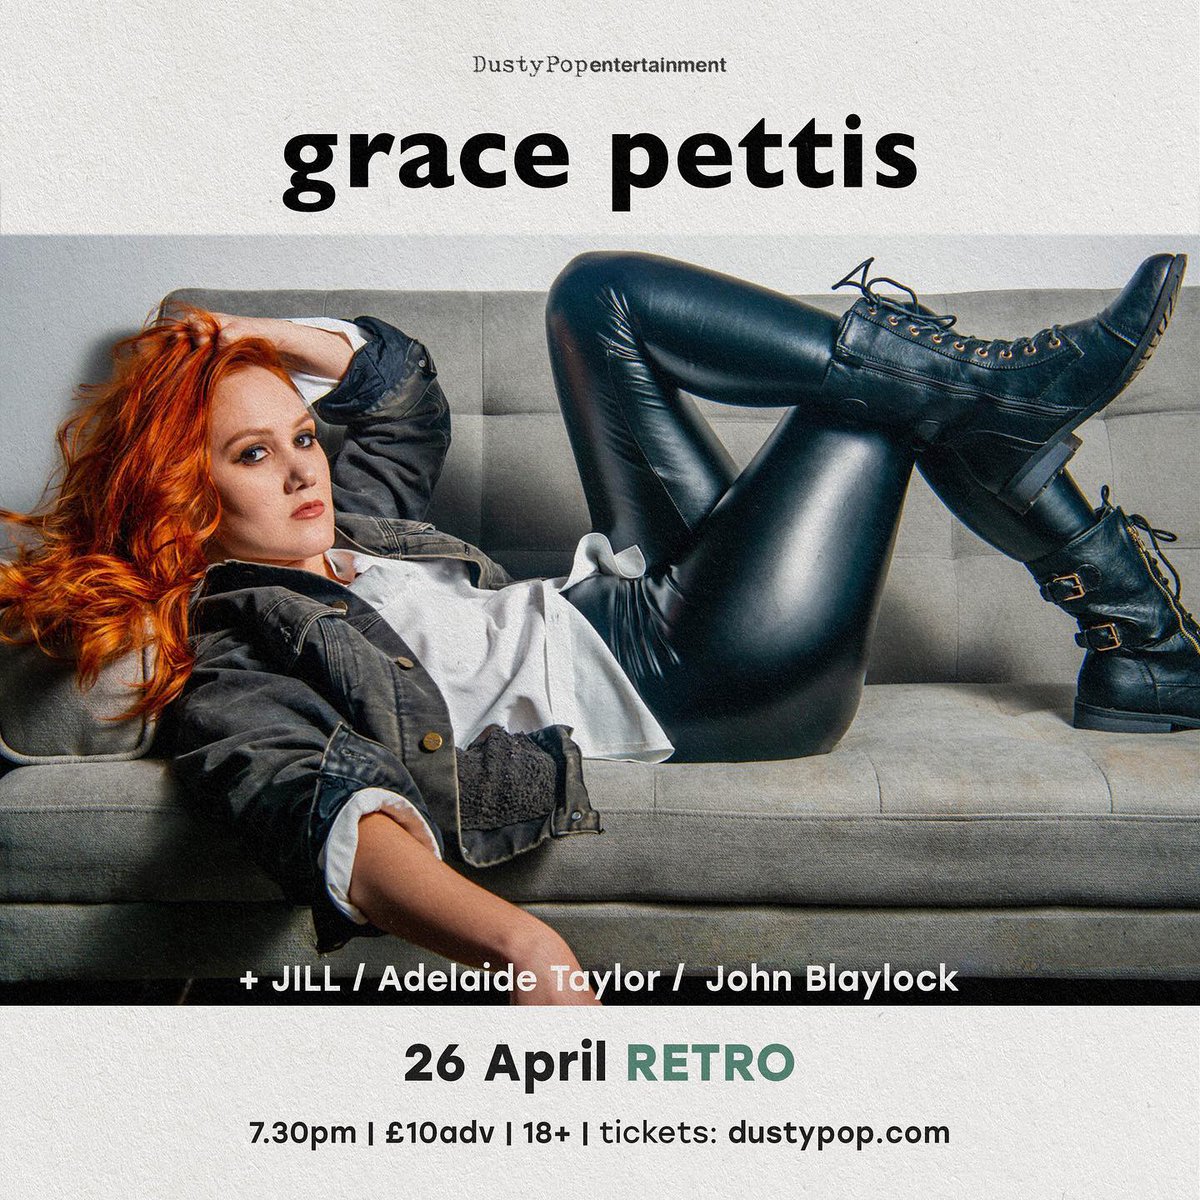 .@GracePettis' #UK Tour Dates start this week! The first stop is this Wednesday at @ManchesterRetro! She will also be making stops in #London, #Nottingham, #Durham & #Preston. All the dates & ticket links are listed on her website at gracepettis.com.